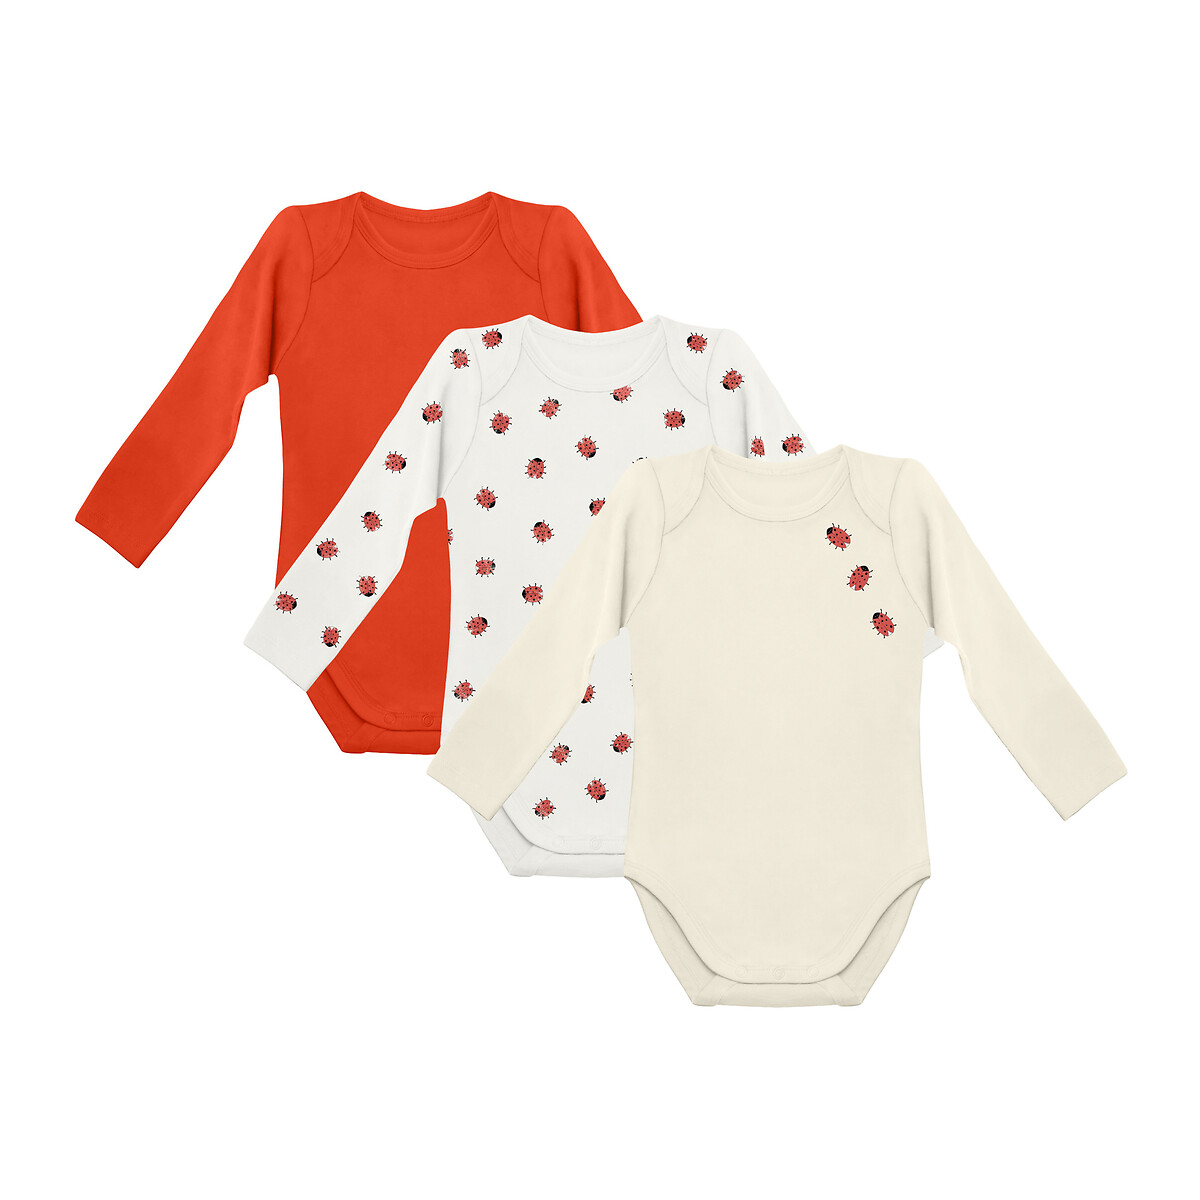 Pack of 3 Bodysuits in Cotton with Long Sleeves, 1 Month-2 Years